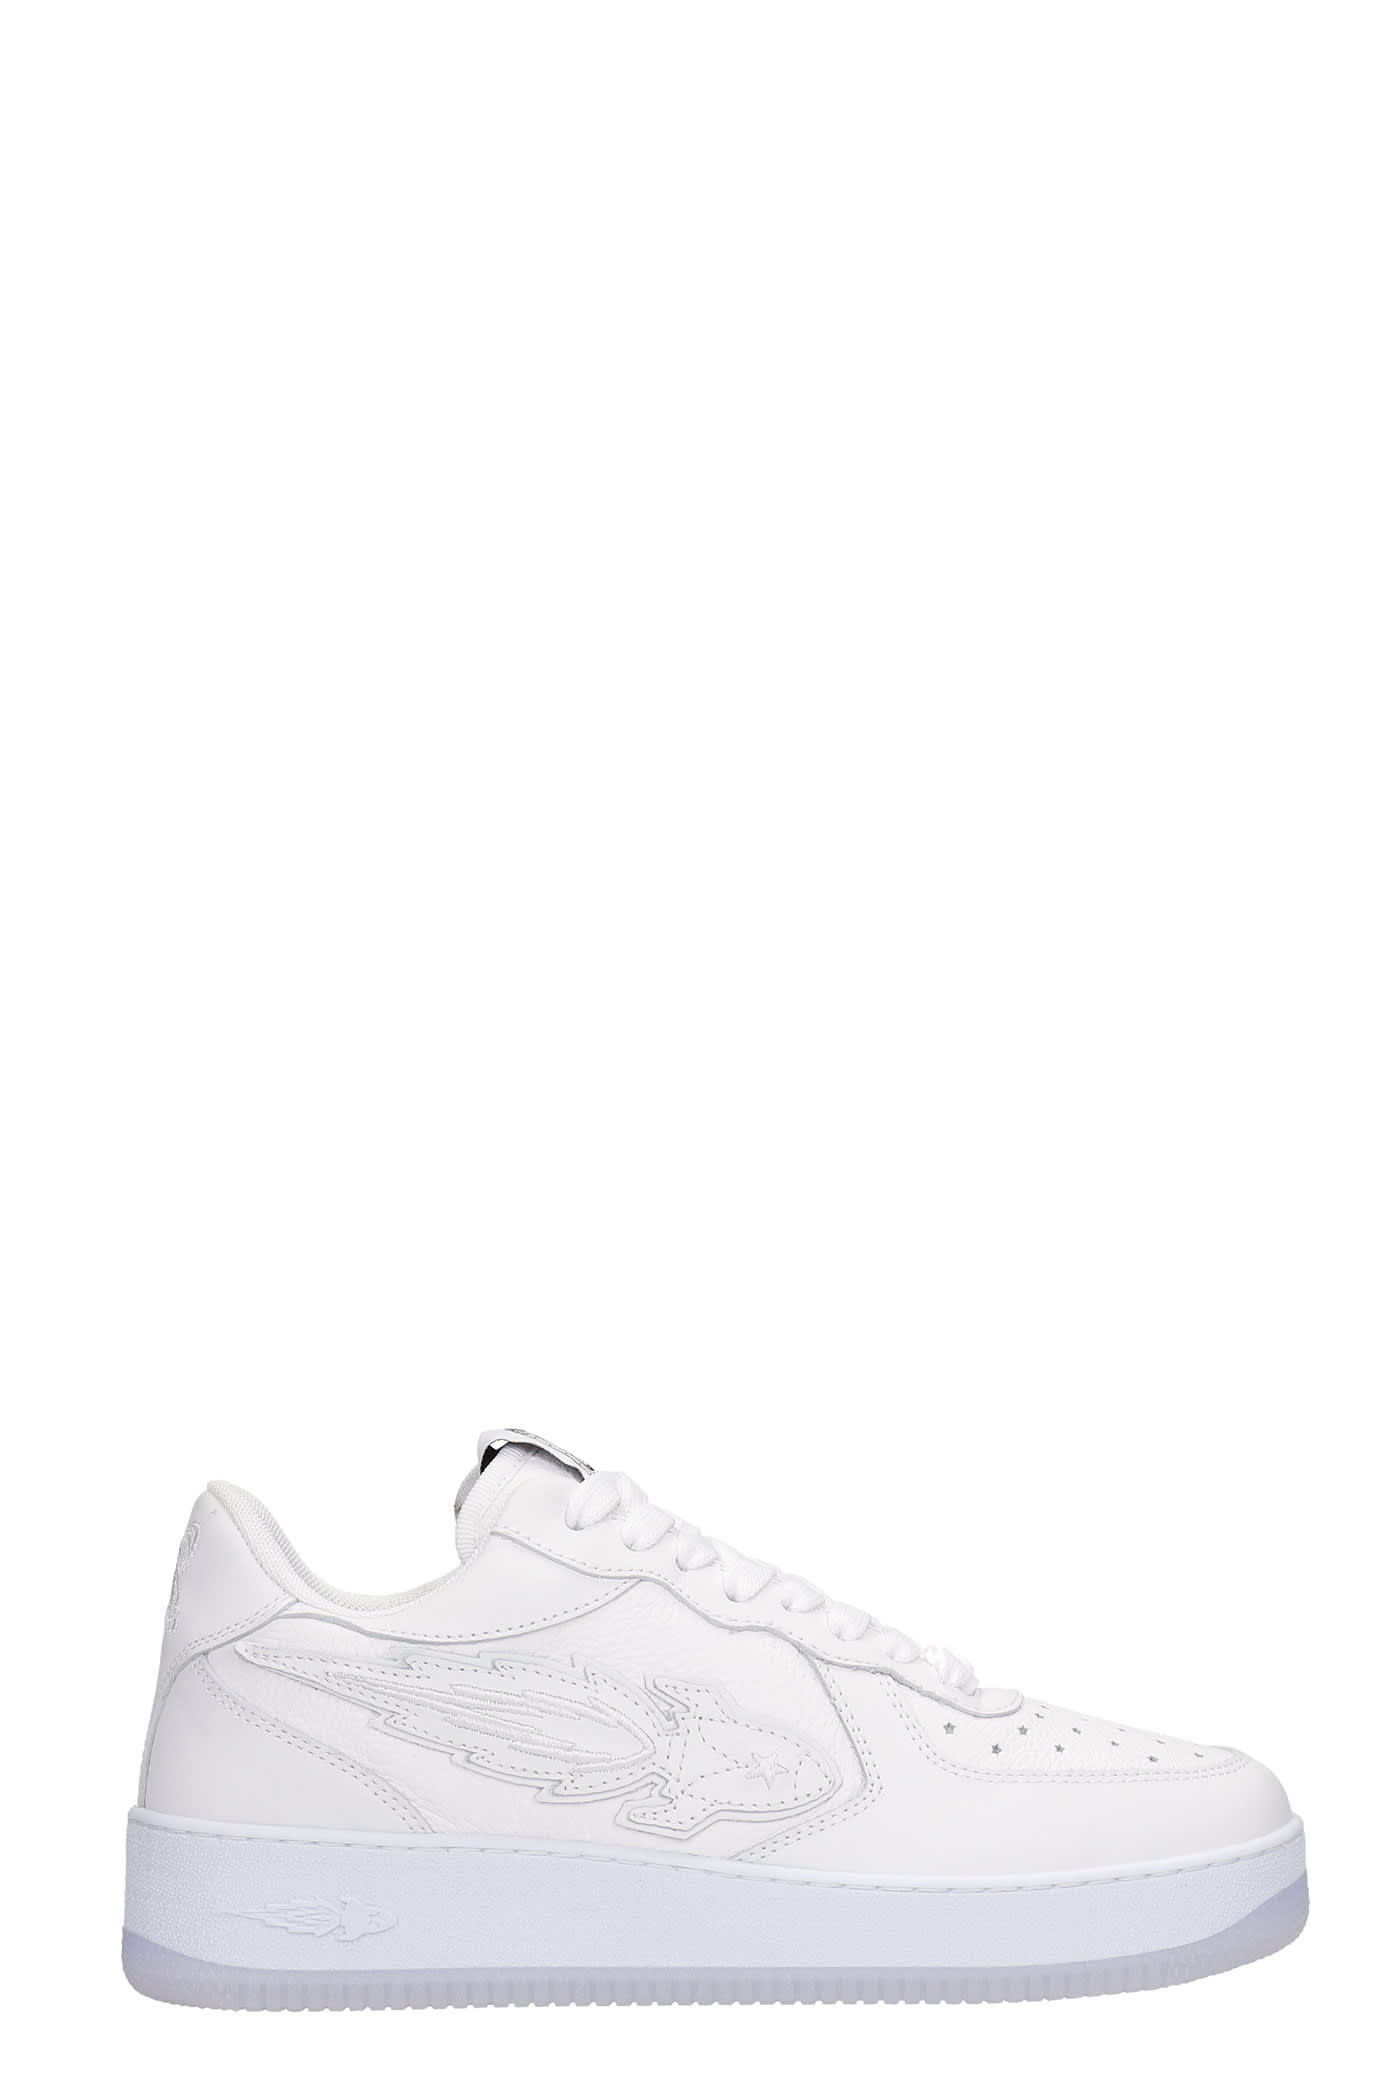 Enterprise Japan Sneakers In White Leather